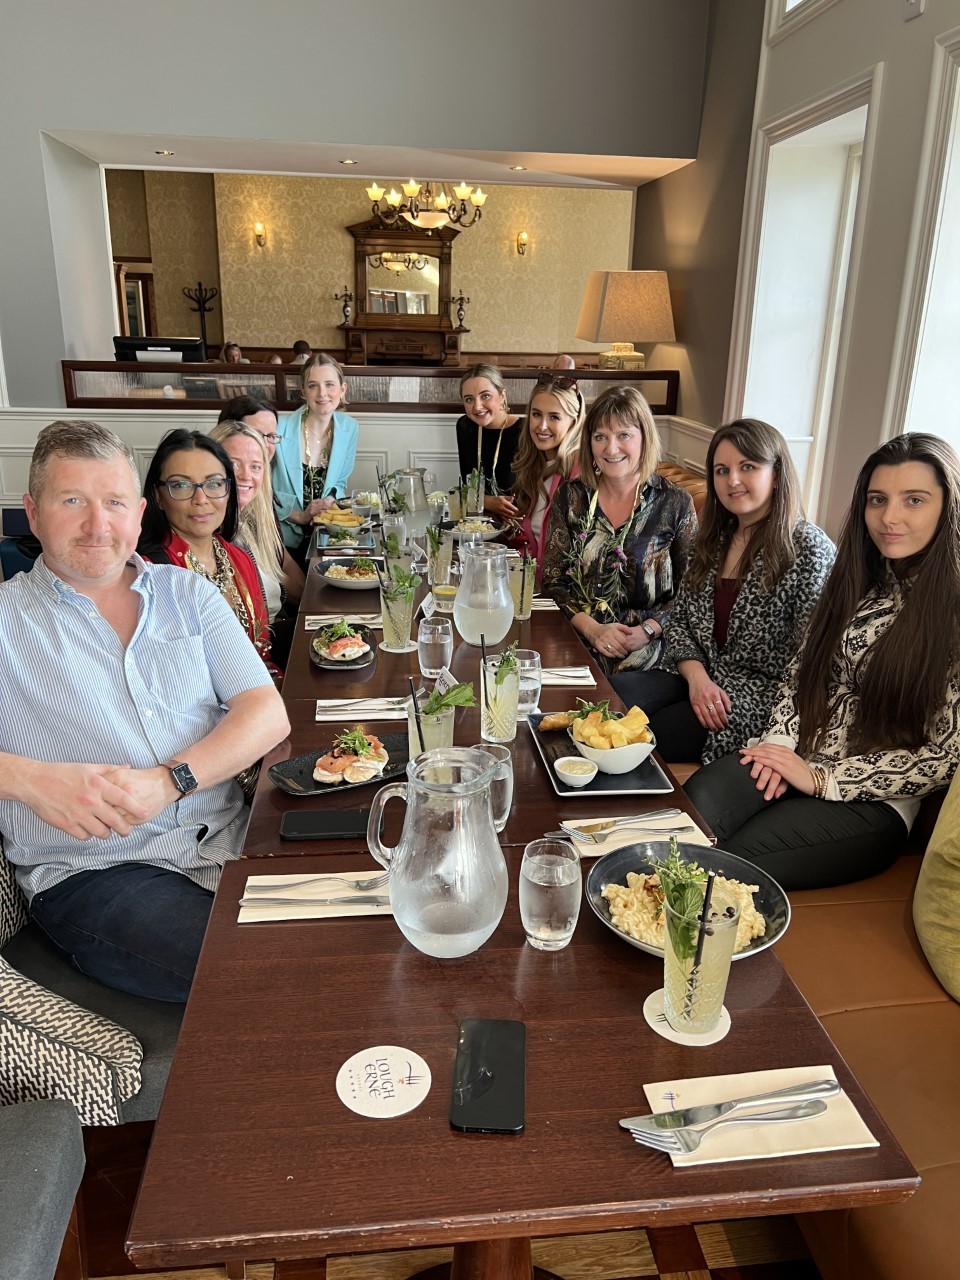 Invited guests including press and social media influencers from across Northern Ireland celebrating Songkran, Thai New Year at the Lough Erne Resort.